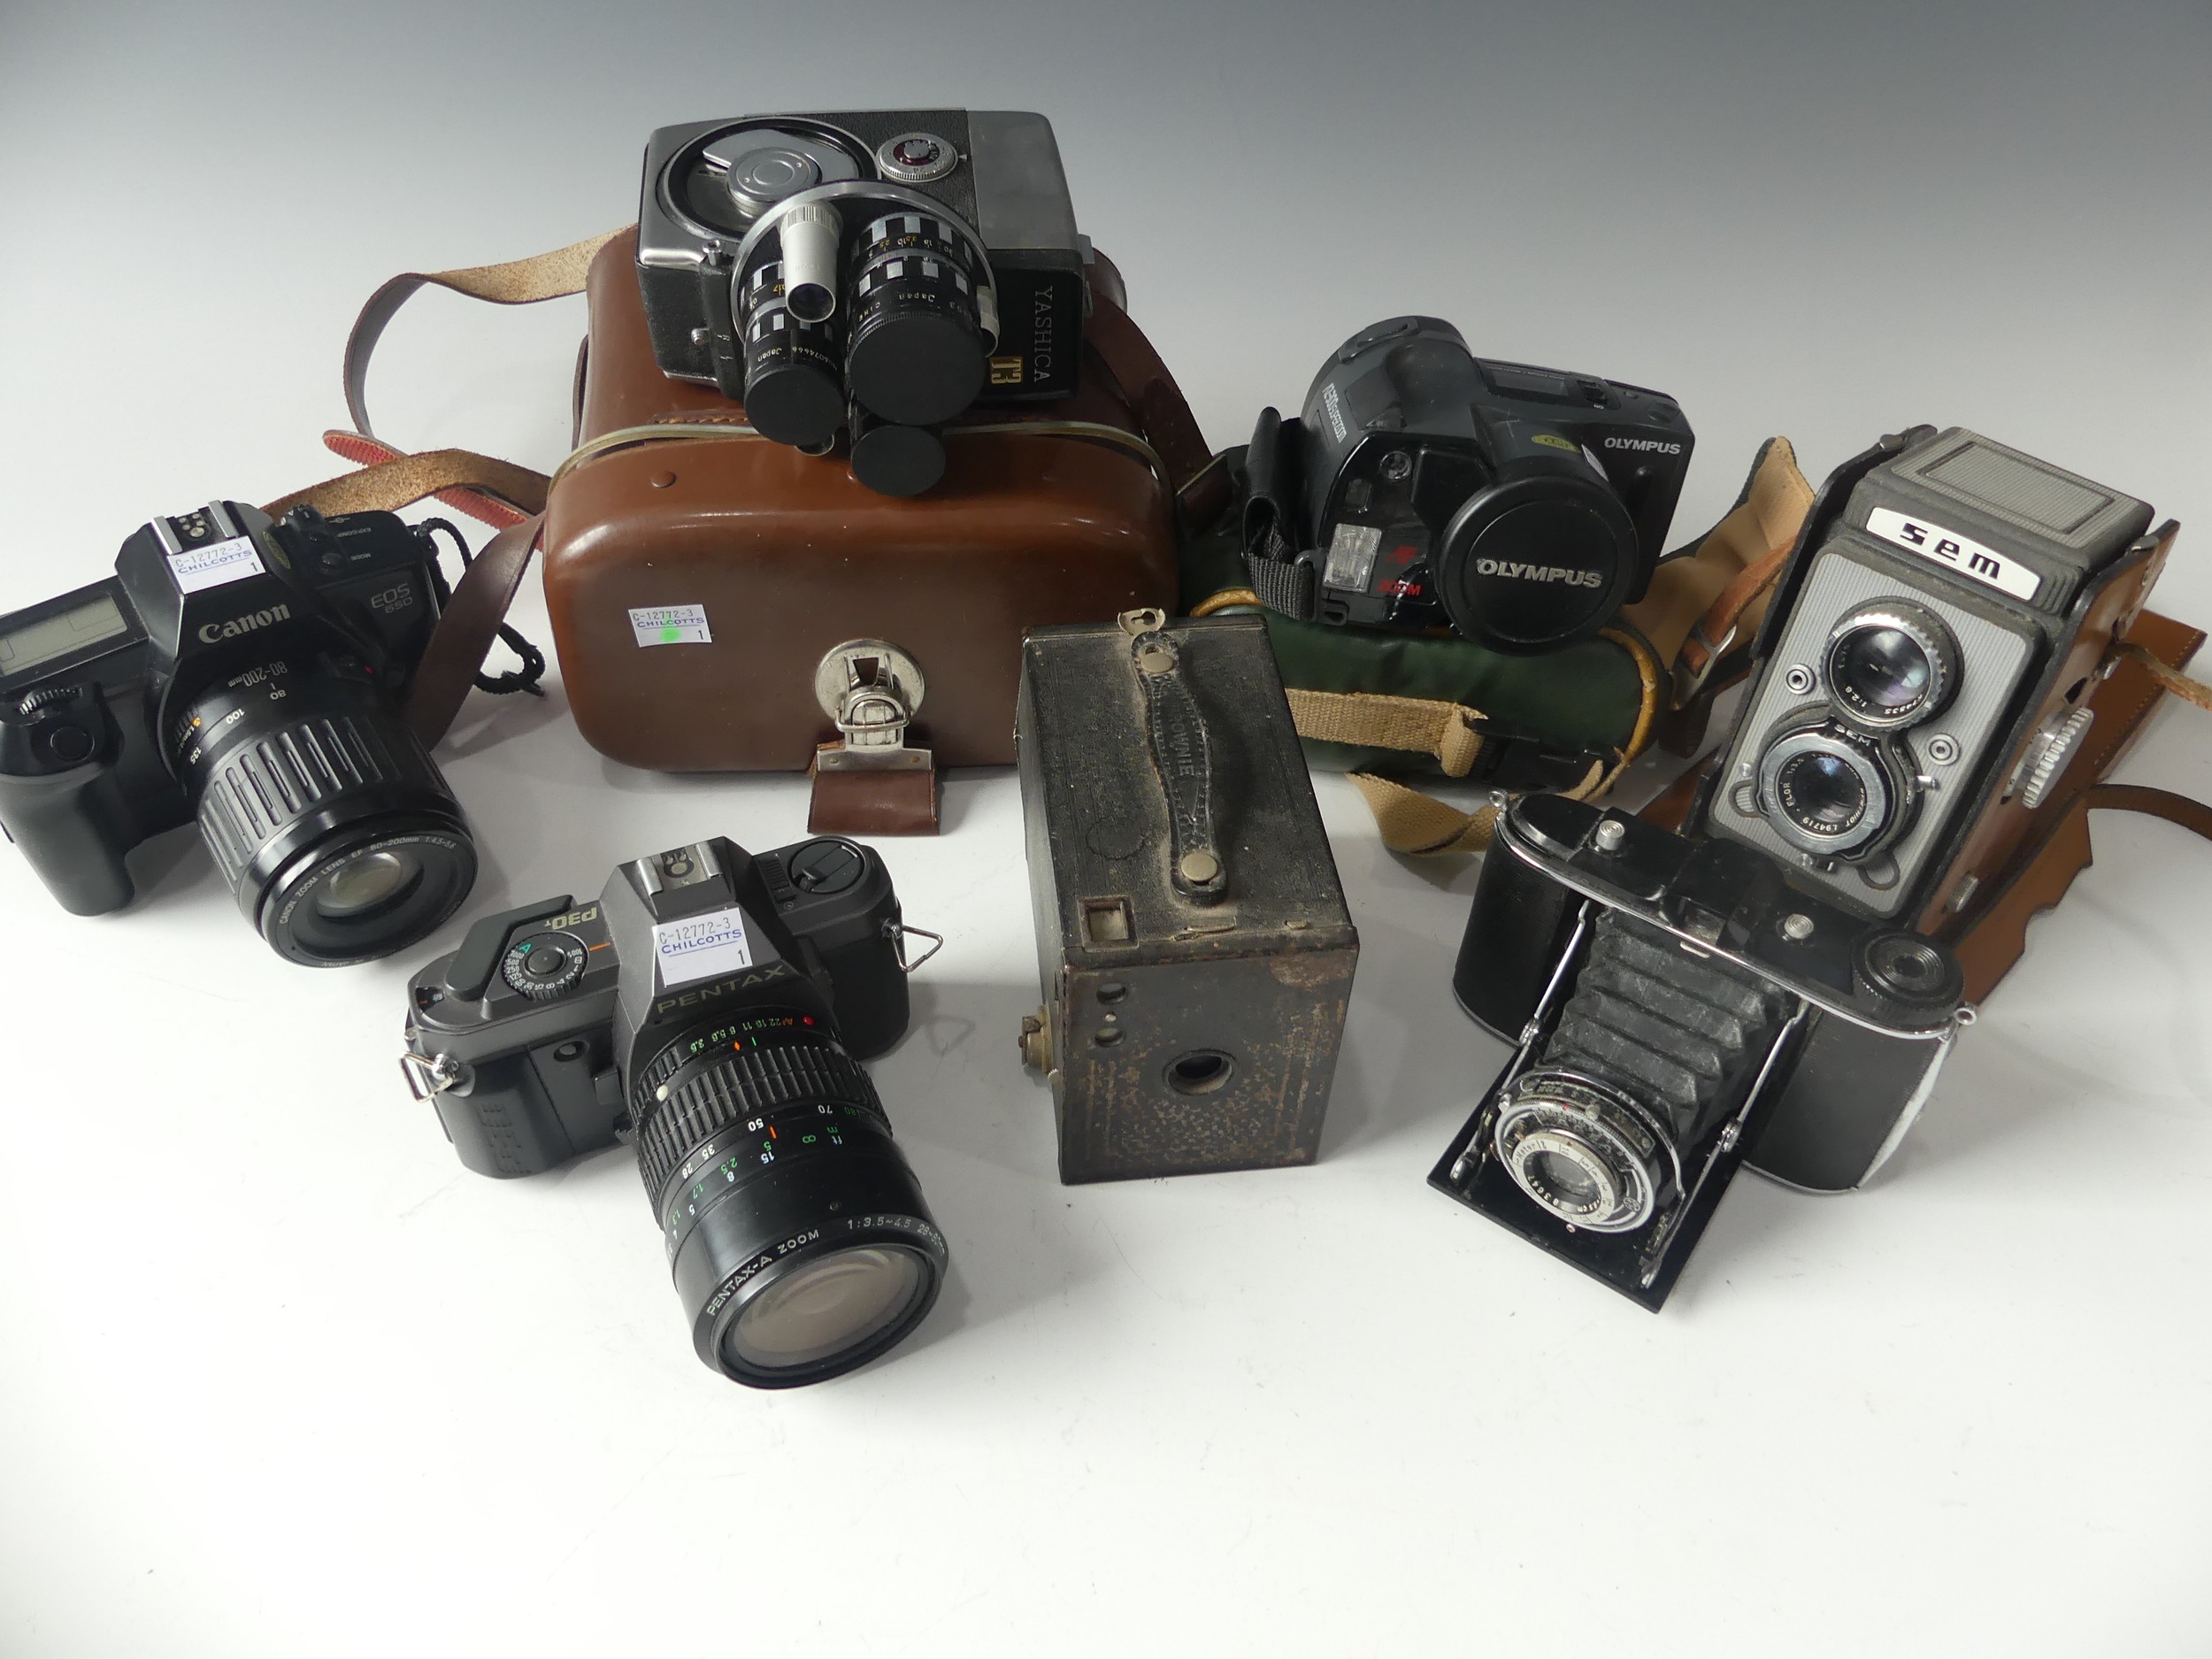 Cameras: ten various vintage cameras, including Pentax MX 35mm SLR with SMC 50mm f1.7 lens and SMC